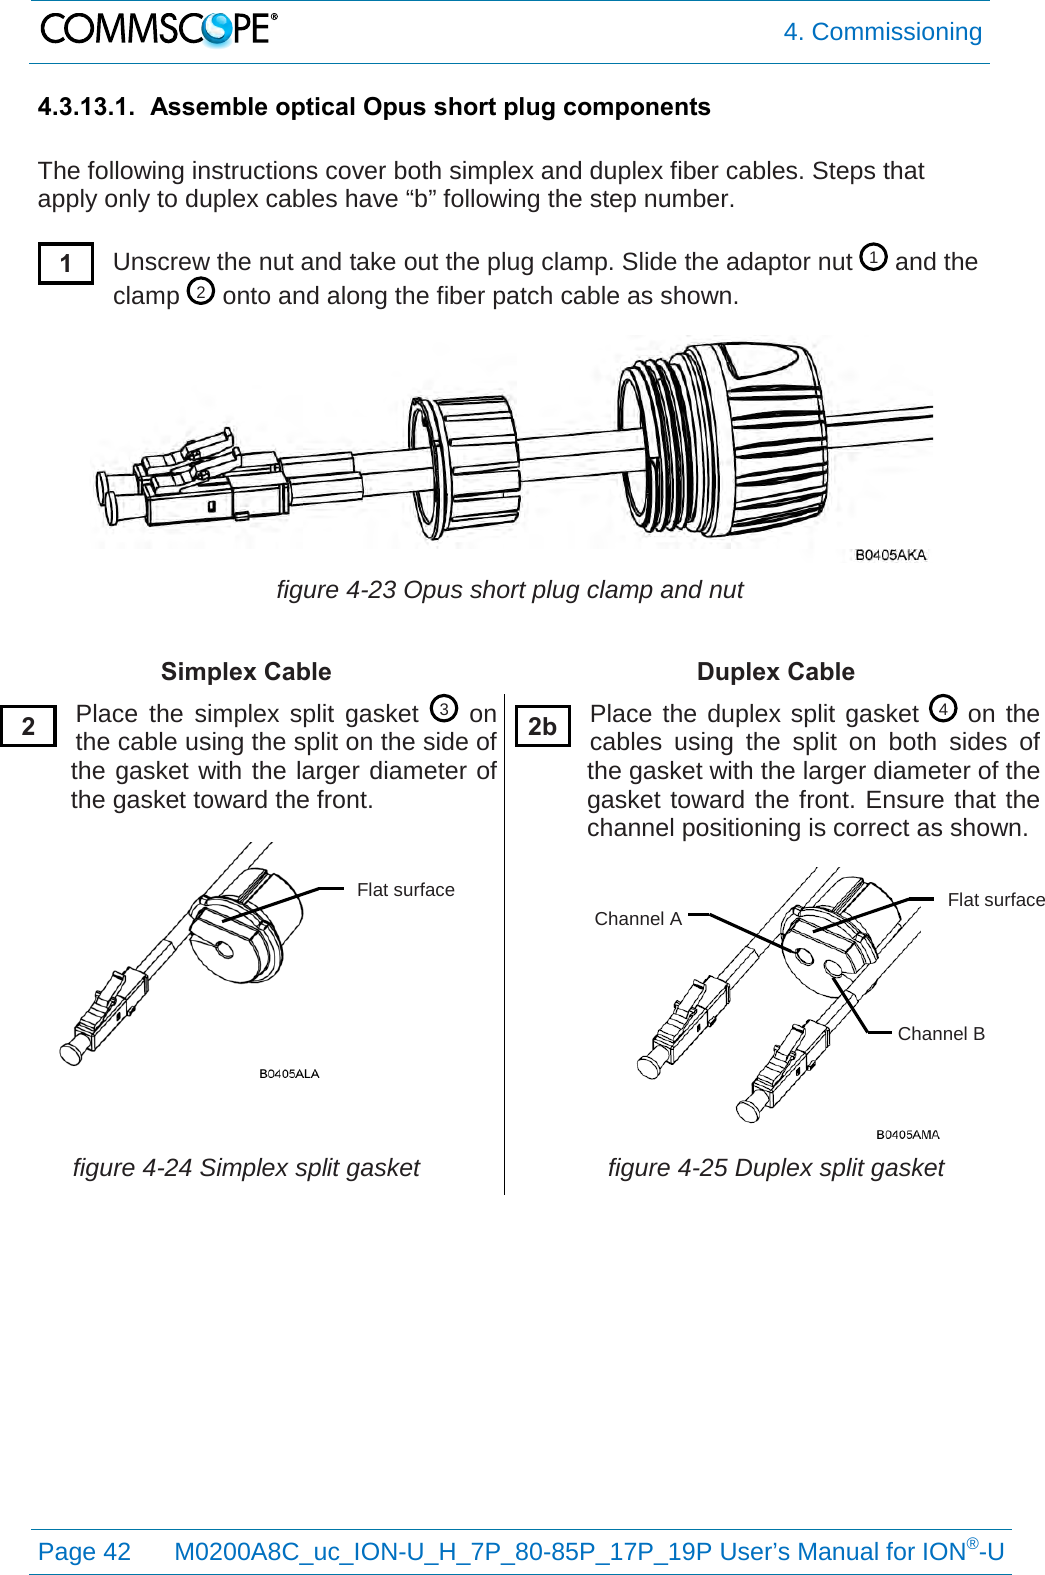  4. Commissioning  Page 42 M0200A8C_uc_ION-U_H_7P_80-85P_17P_19P User’s Manual for ION®-U  4.3.13.1. Assemble optical Opus short plug components  The following instructions cover both simplex and duplex fiber cables. Steps that apply only to duplex cables have “b” following the step number.  Unscrew the nut and take out the plug clamp. Slide the adaptor nut   and the clamp   onto and along the fiber patch cable as shown.  figure 4-23 Opus short plug clamp and nut  Simplex Cable Duplex Cable Place the simplex split gasket   on the cable using the split on the side of the gasket with the larger diameter of the gasket toward the front.  Place the duplex split gasket   on the cables using the split on both sides of the gasket with the larger diameter of the gasket toward the front. Ensure that the channel positioning is correct as shown.  figure 4-24 Simplex split gasket figure 4-25 Duplex split gasket   4 3 2 1 1 2 2b Flat surface Channel B Channel A Flat surface 